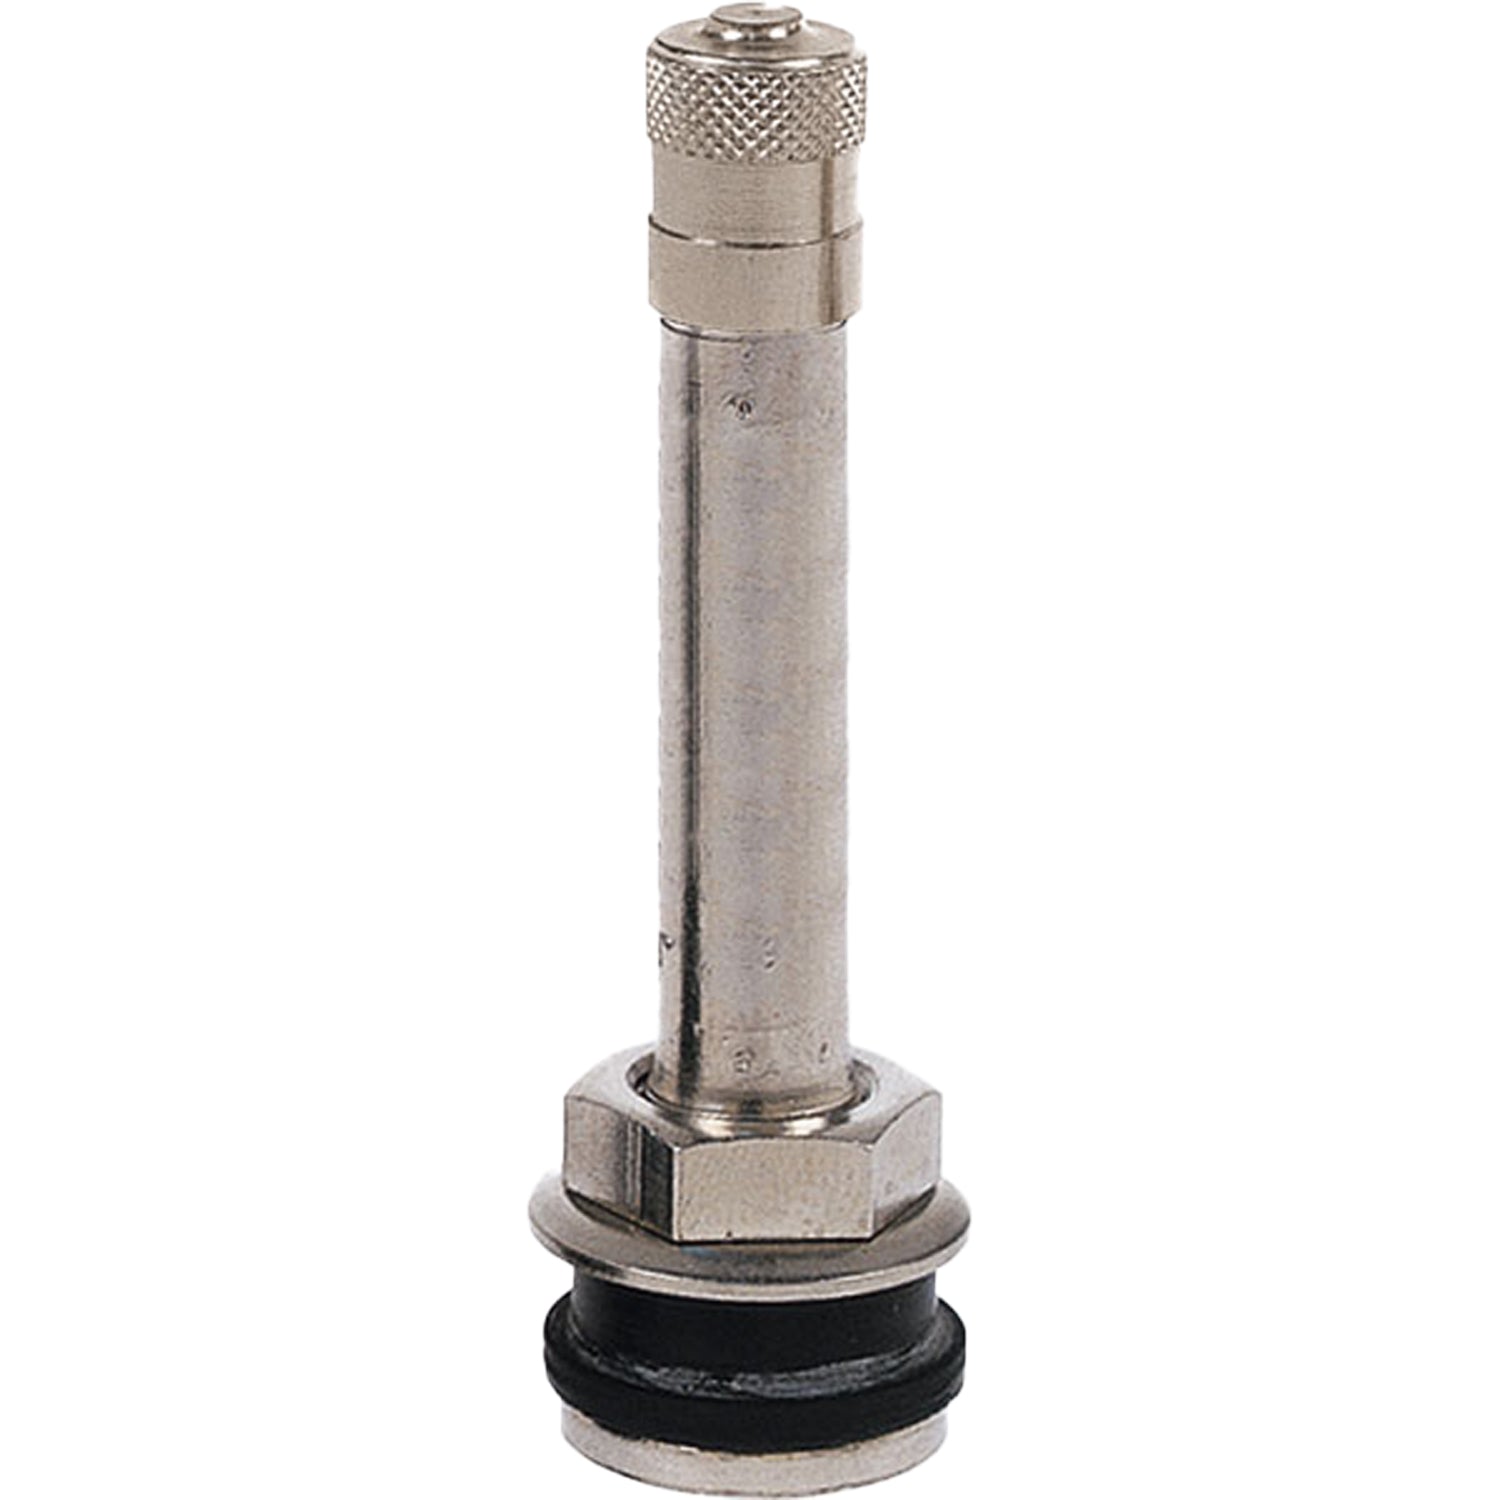 TR416 2" Metal Clamp In Valve Stem for .453 and .625 Valve Holes